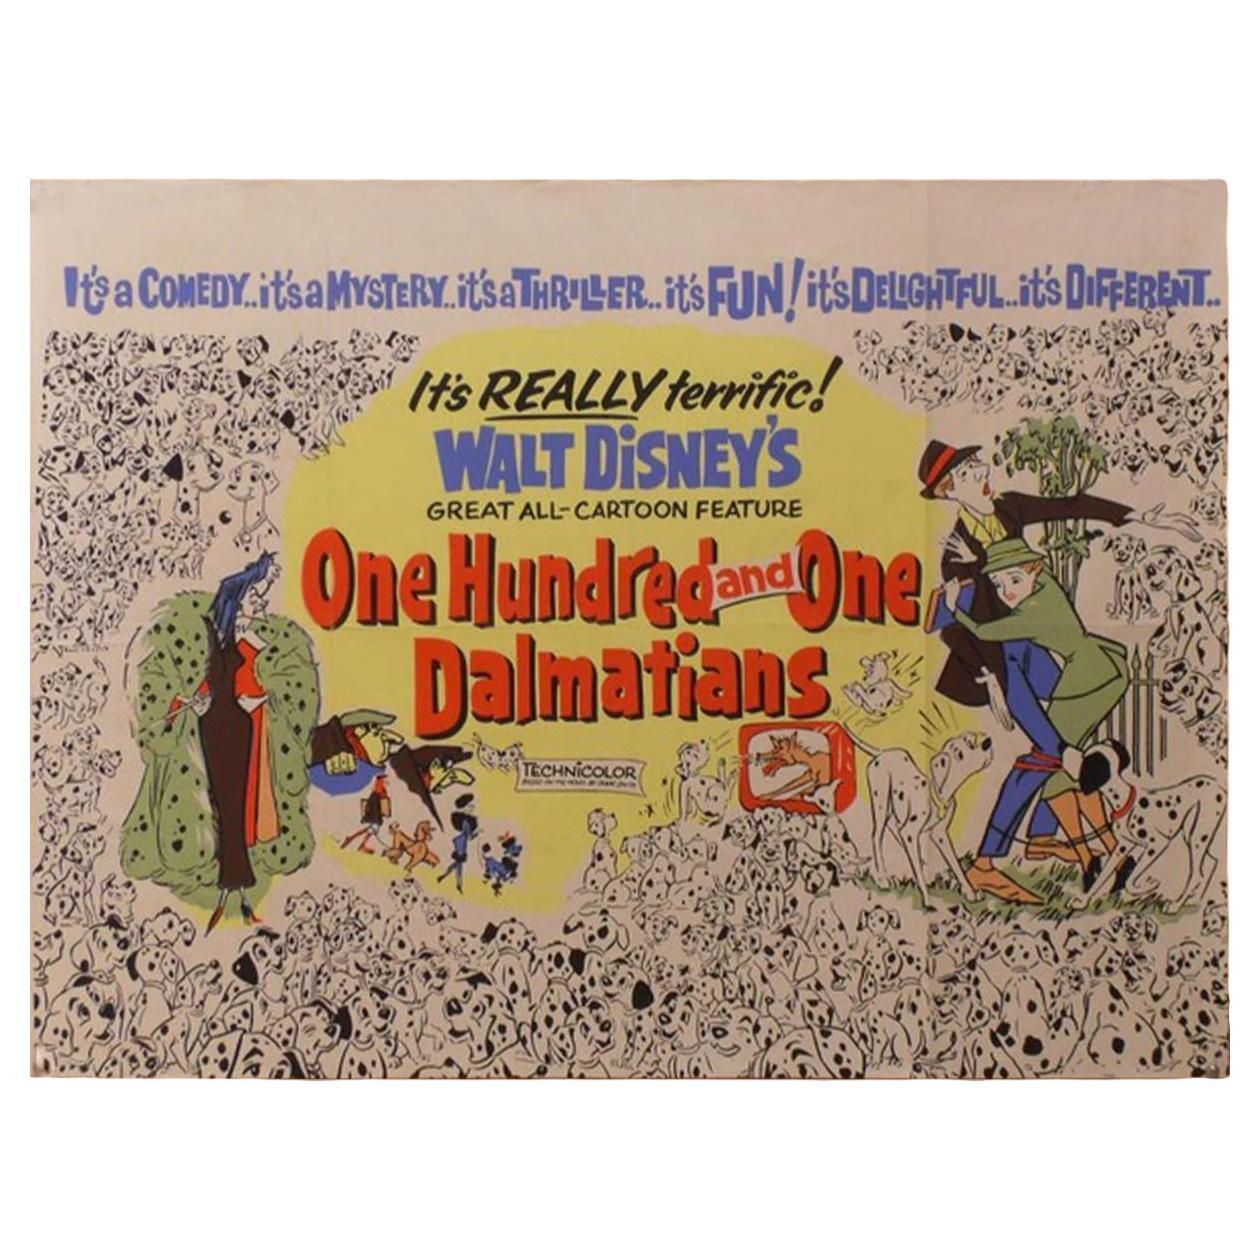 One Hundred and One Dalmatians, Unframed Poster, 1969 For Sale